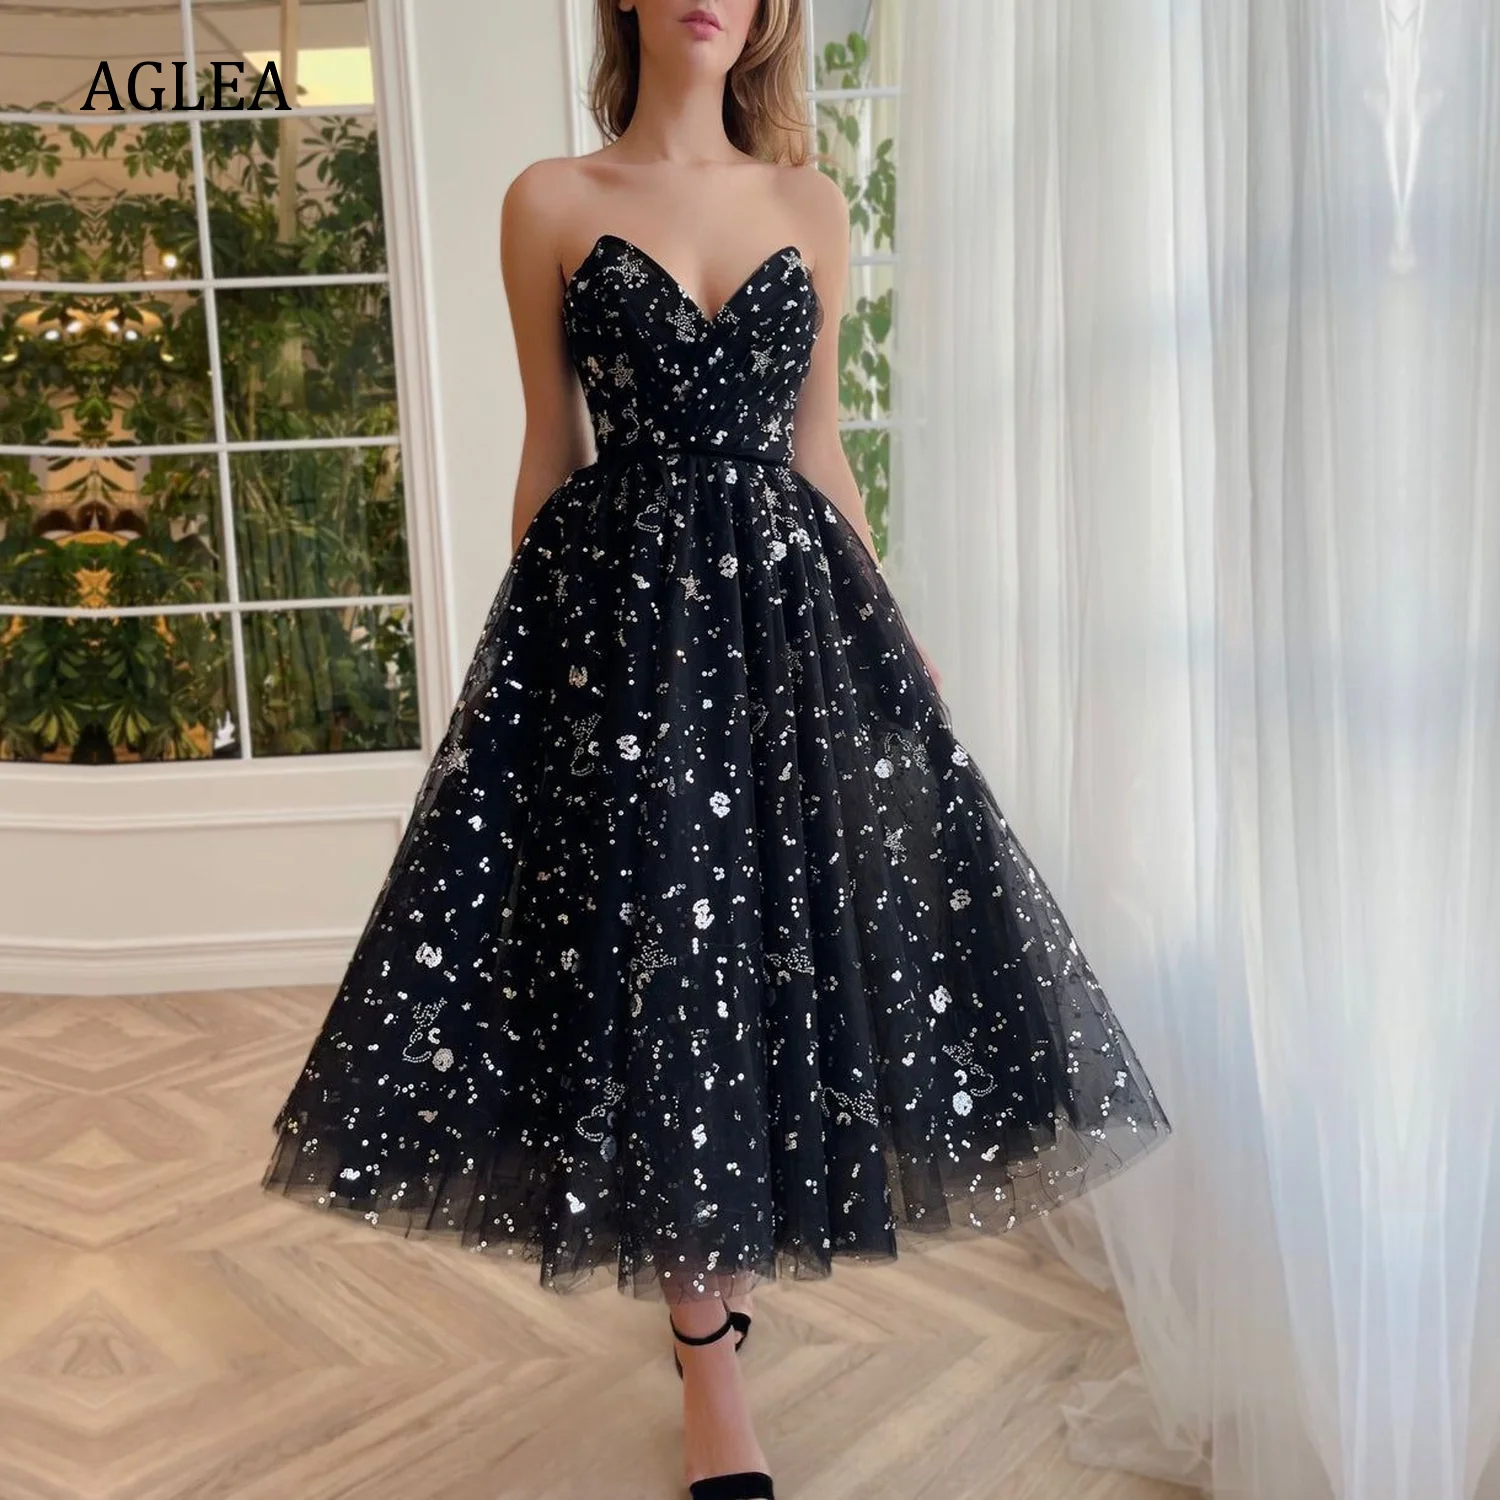 

AGLEA Evening Dresses Formal Occasion Elegant Party for Women Prom Short Length Sweetheart Sash Pleat A-line Draped Floral Print